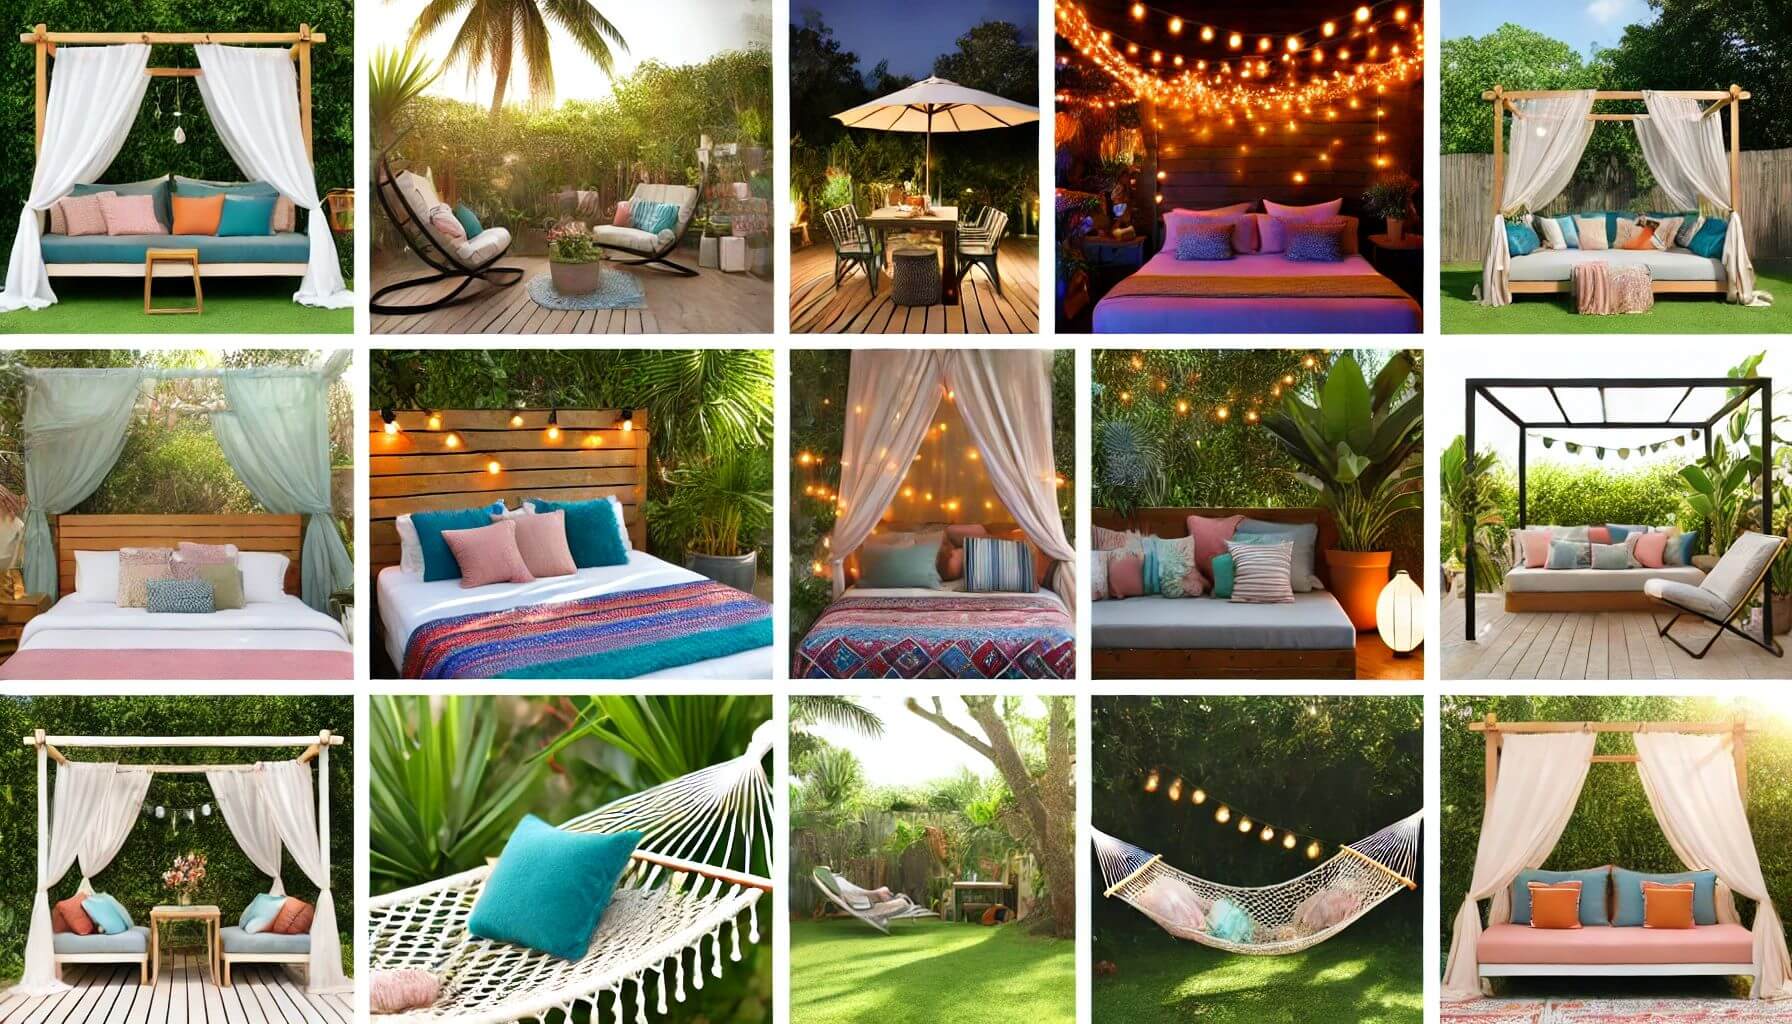 How to Design a Dreamy Outdoor Bedroom for This Summer